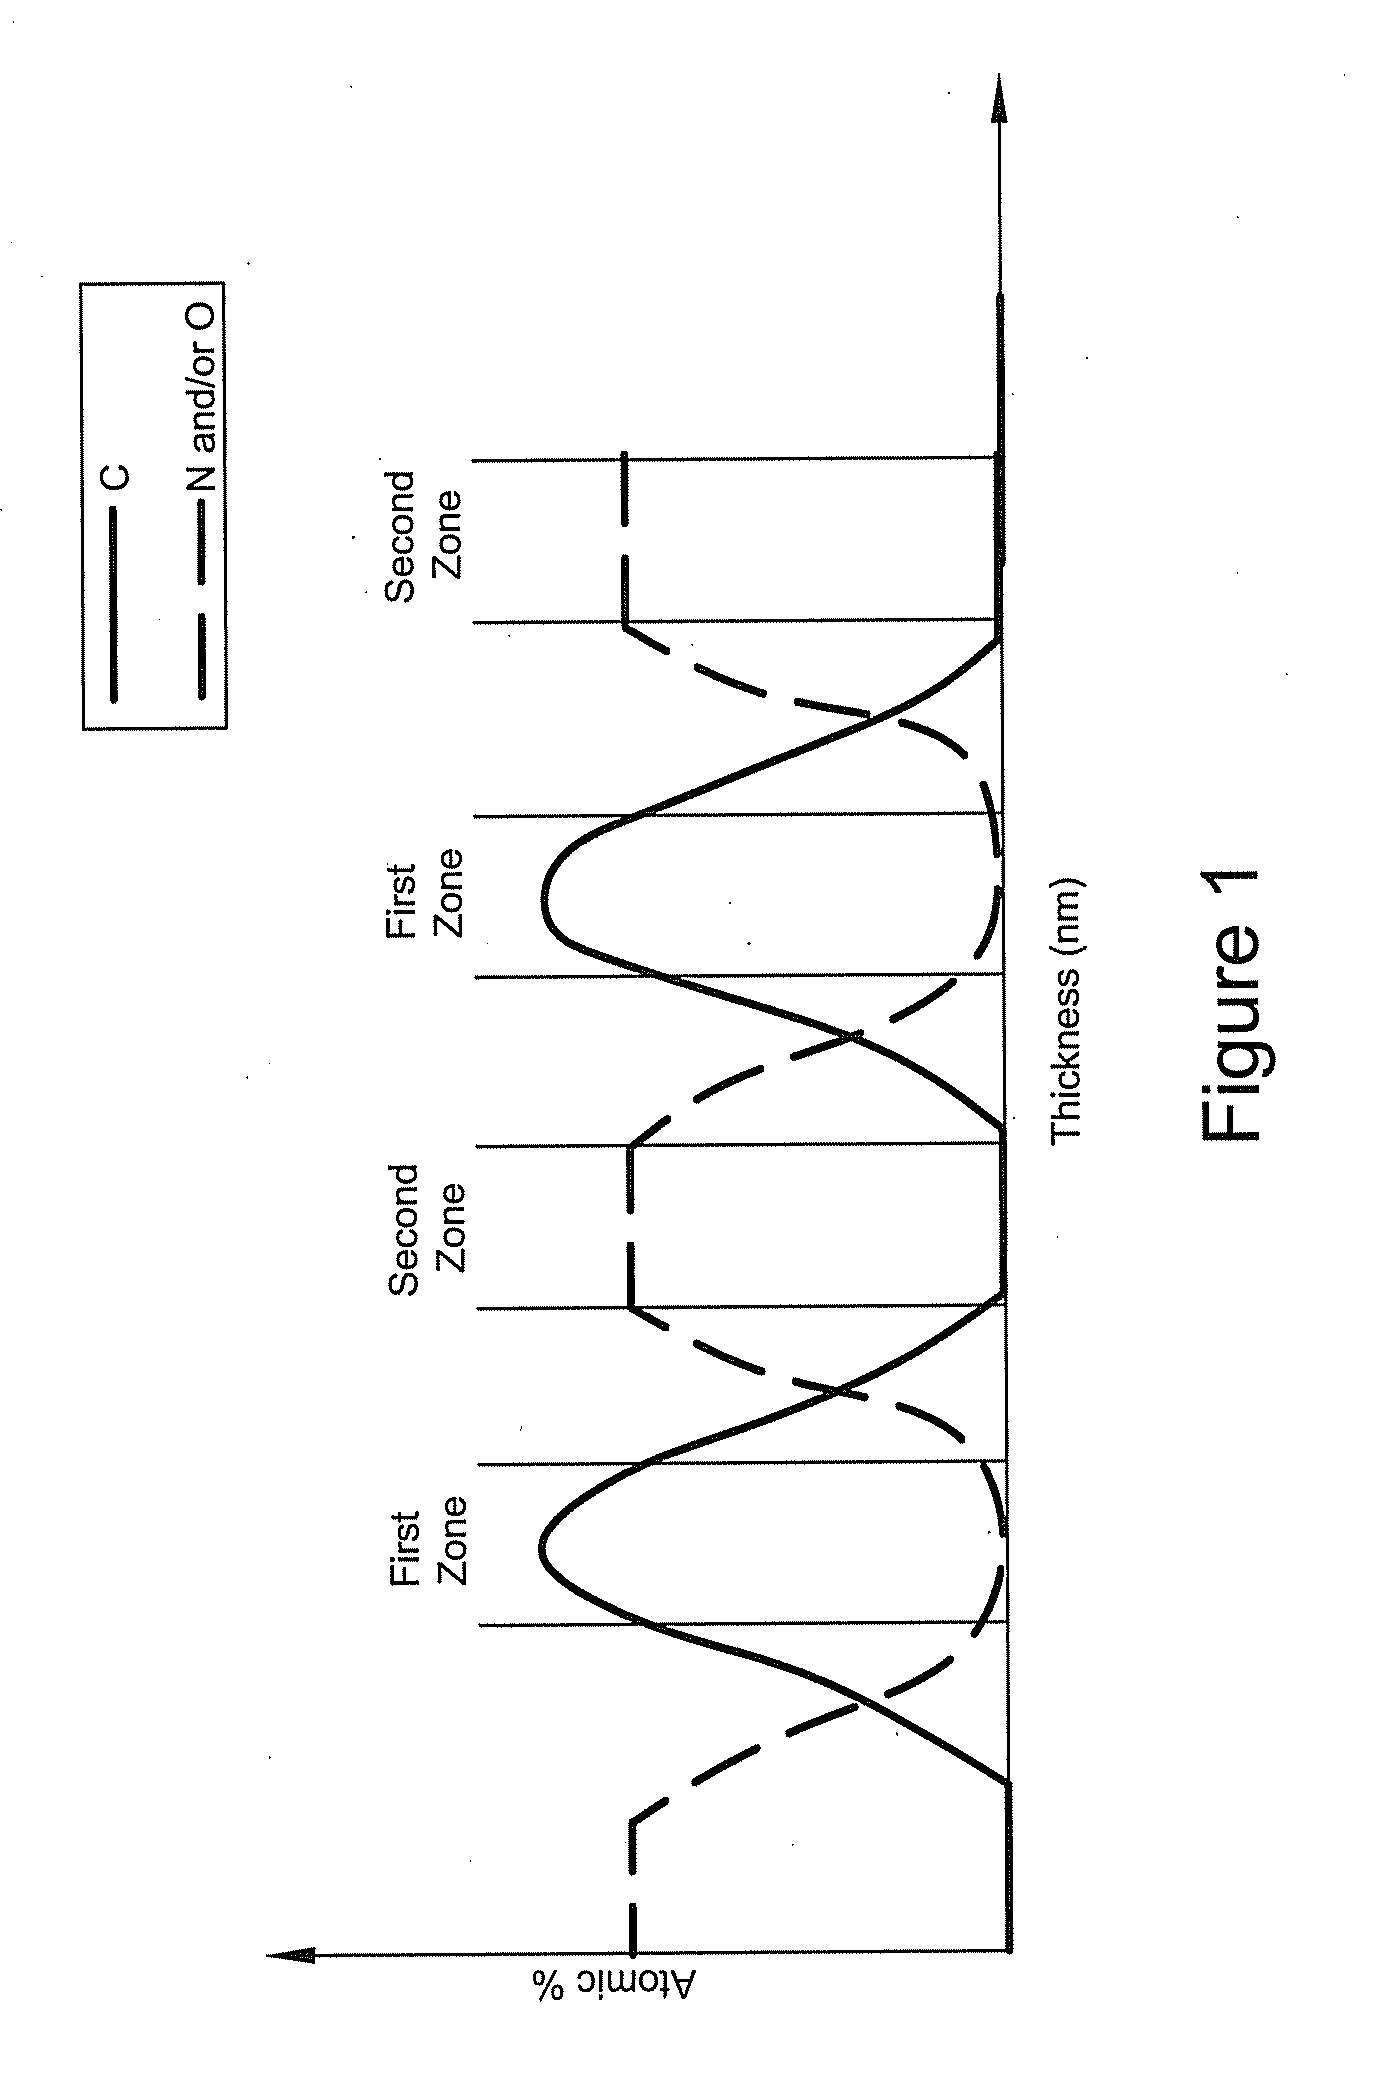 System and method for making a graded barrier coating